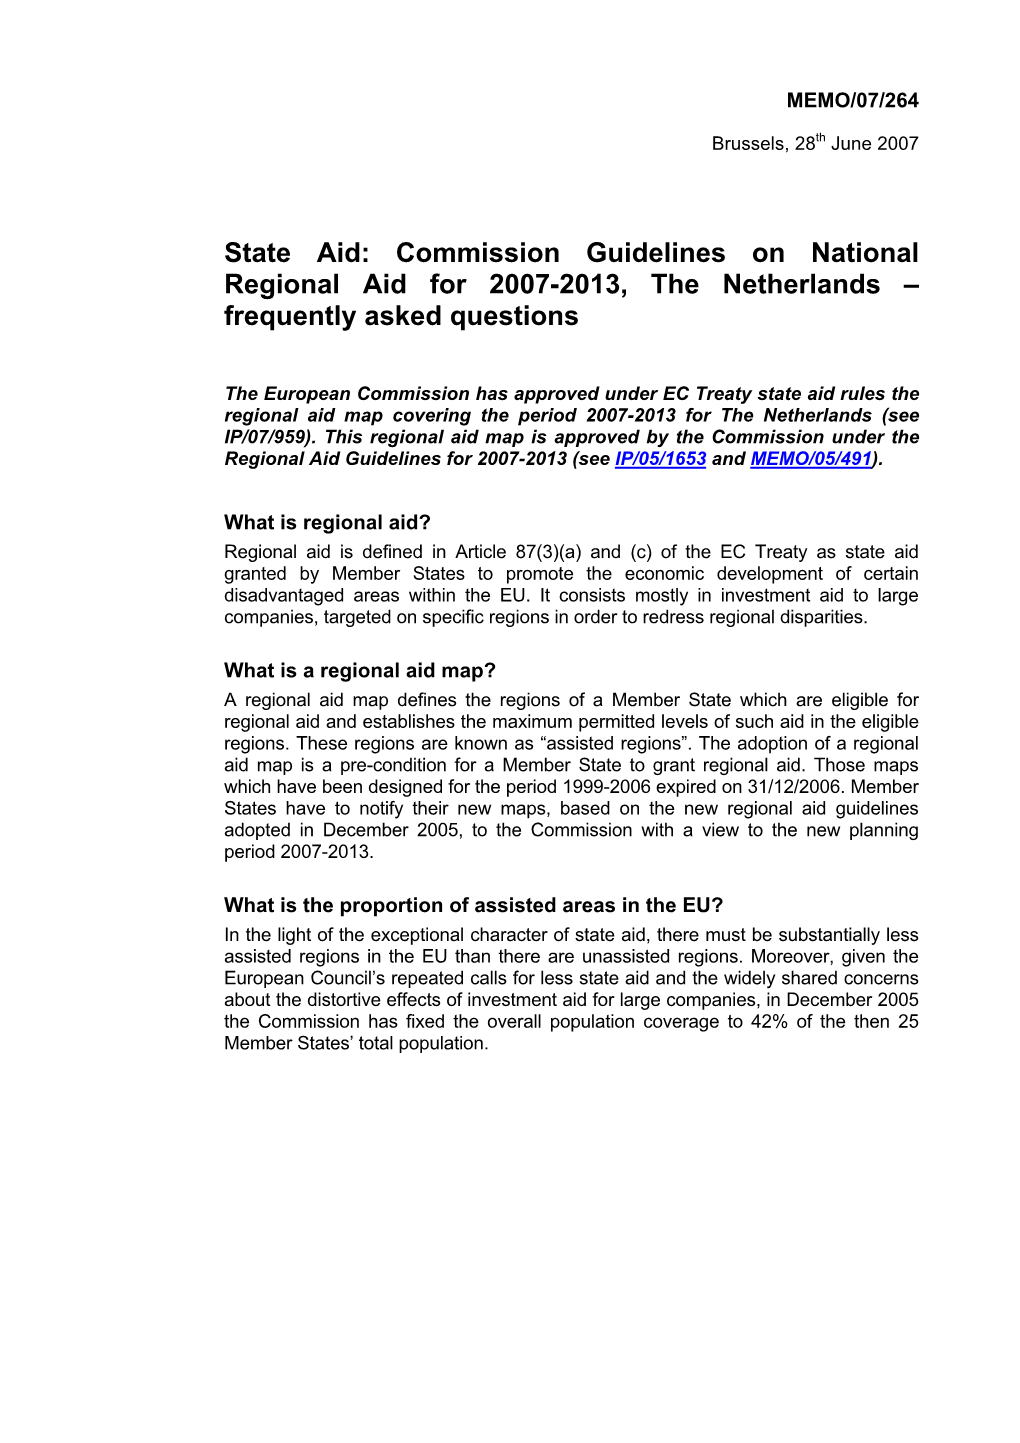 State Aid: Commission Guidelines on National Regional Aid for 2007-2013, the Netherlands – Frequently Asked Questions